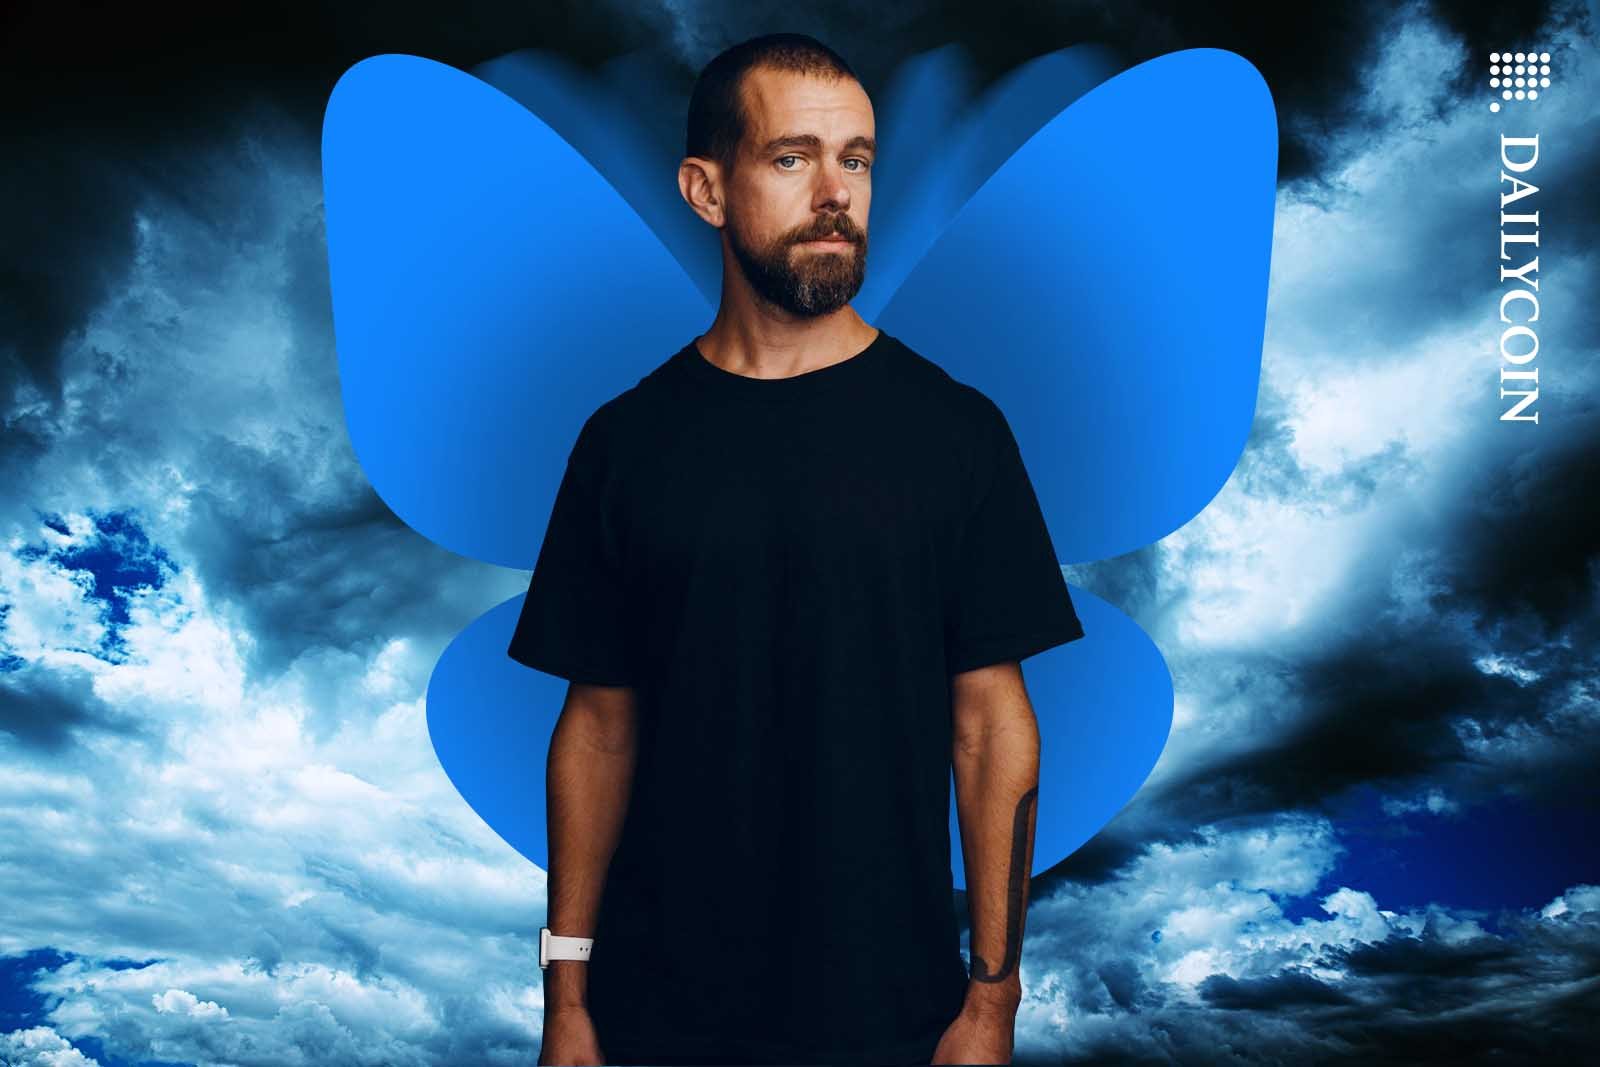 Jack Dorsey about to take off with blue butterfly wings on his back.